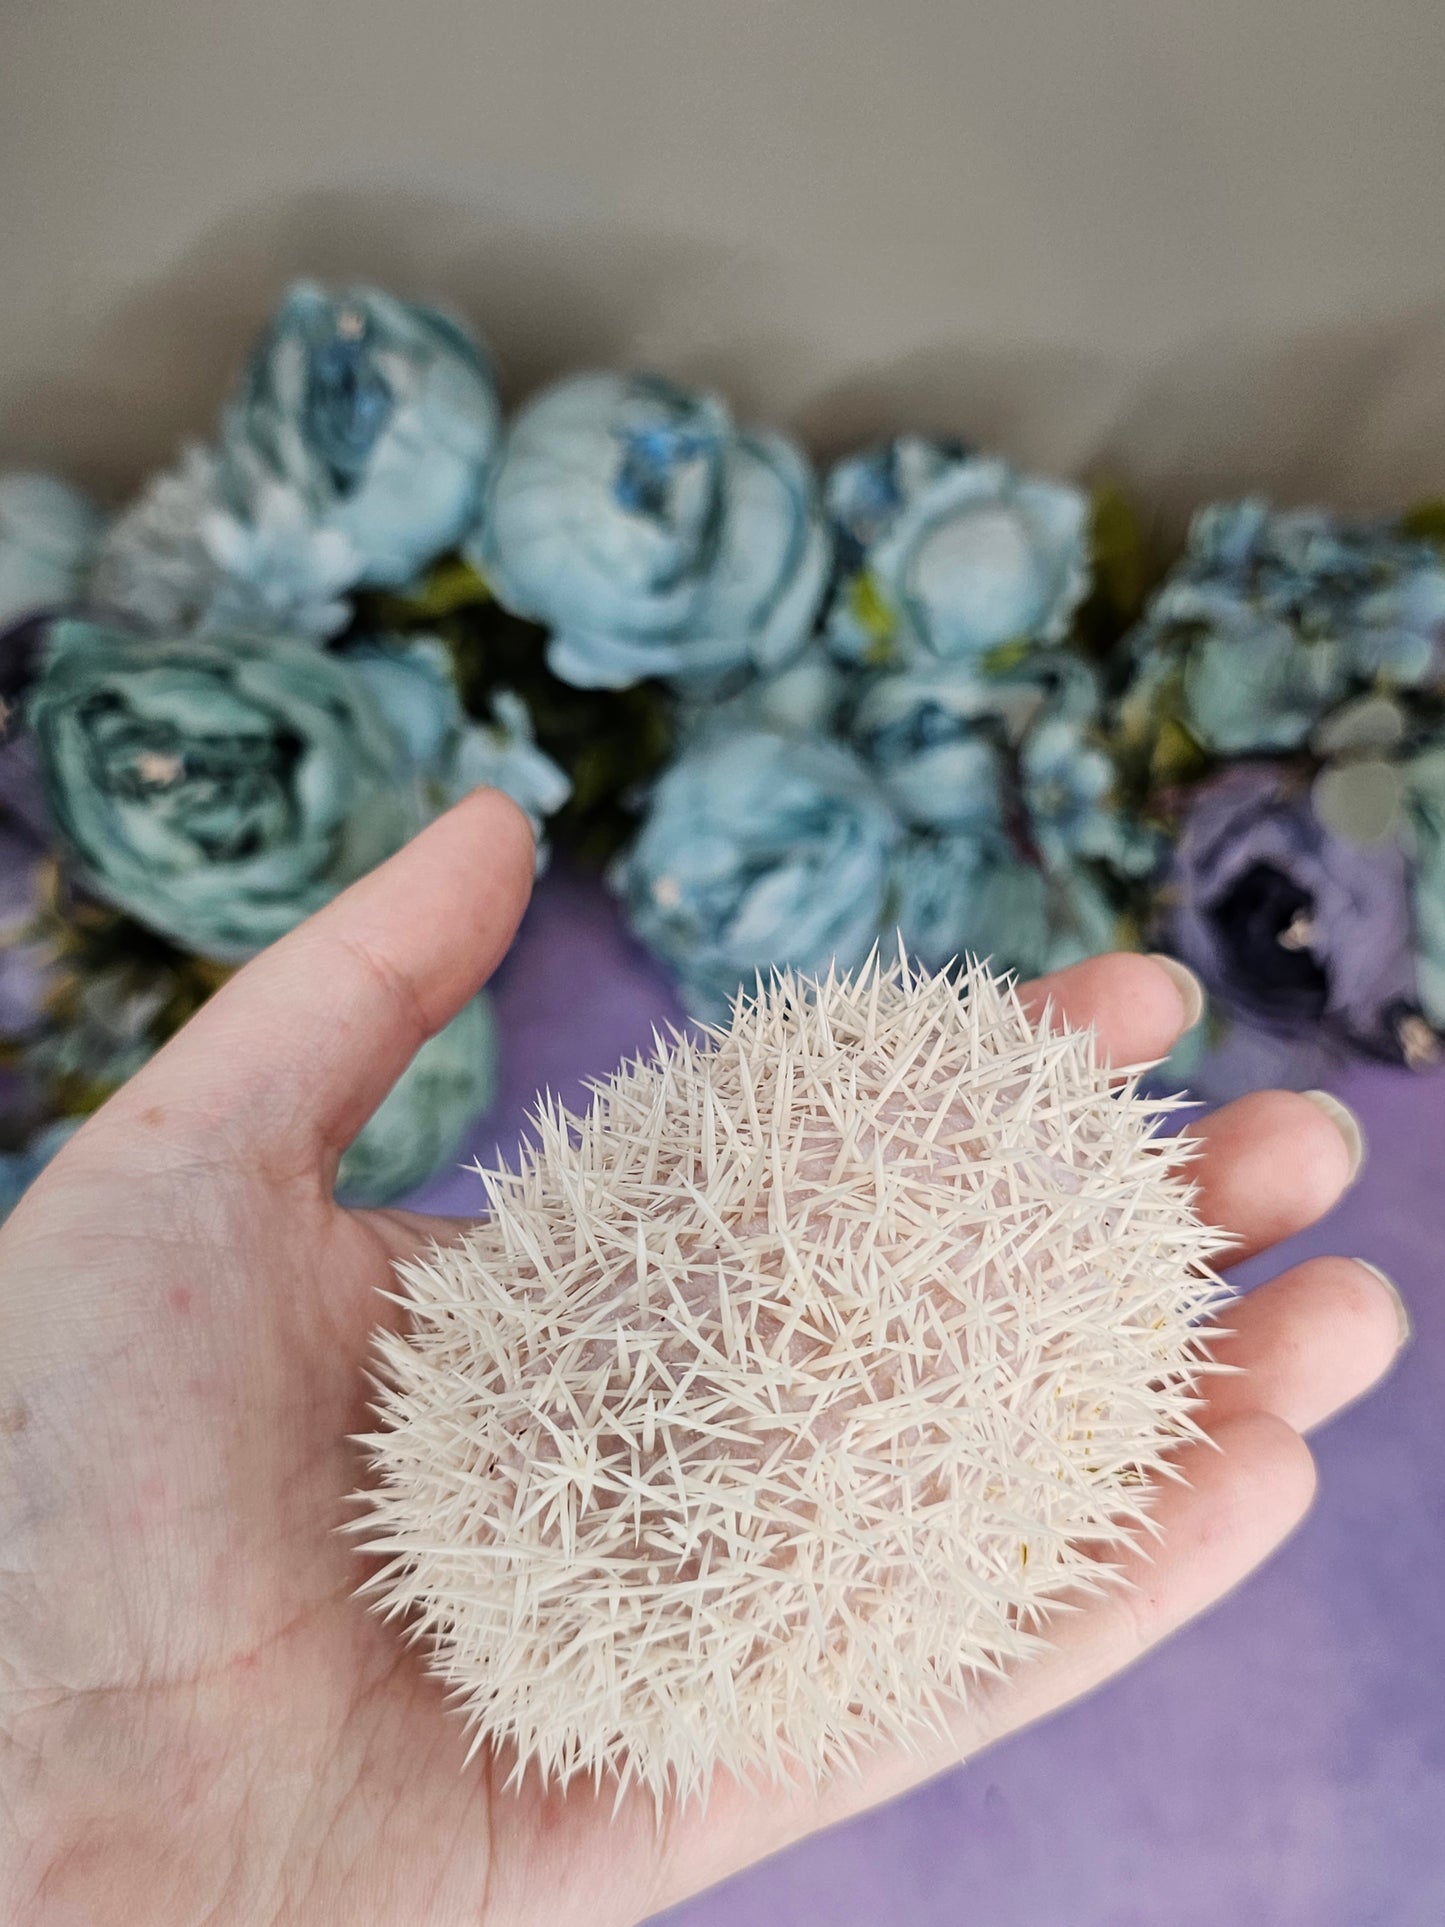 shows a white furred hedgehog with white quills being held face down to show their quills against a backdrop of artifical flowers